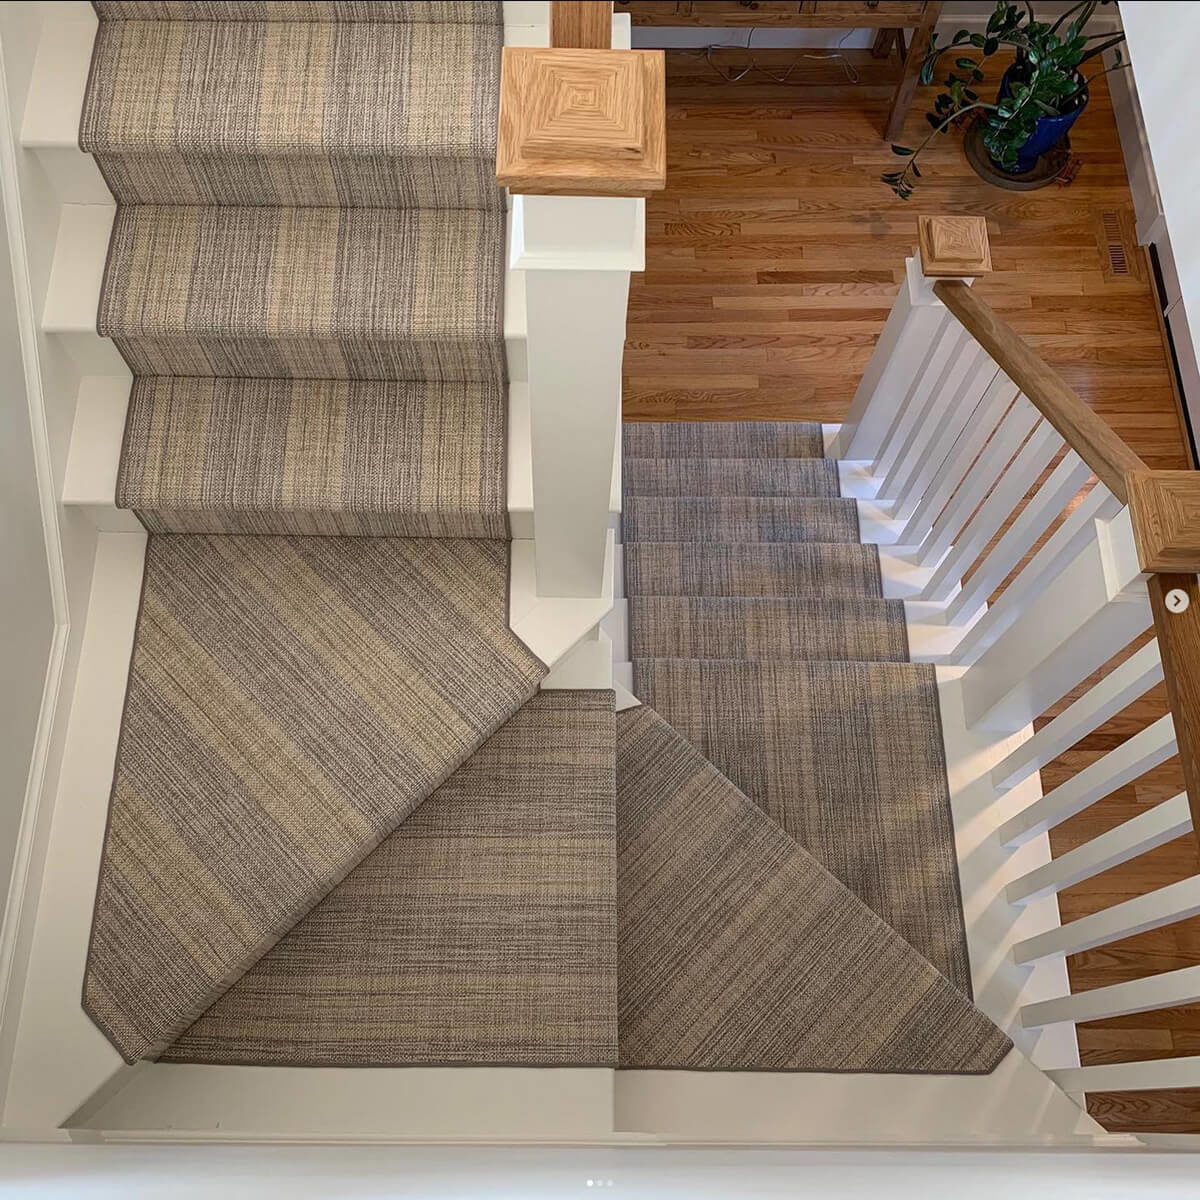 Linen Stripe, Color: Silver Sand 230/5703 installed on stairs and hallway. Image credit: Gordon Rugs.